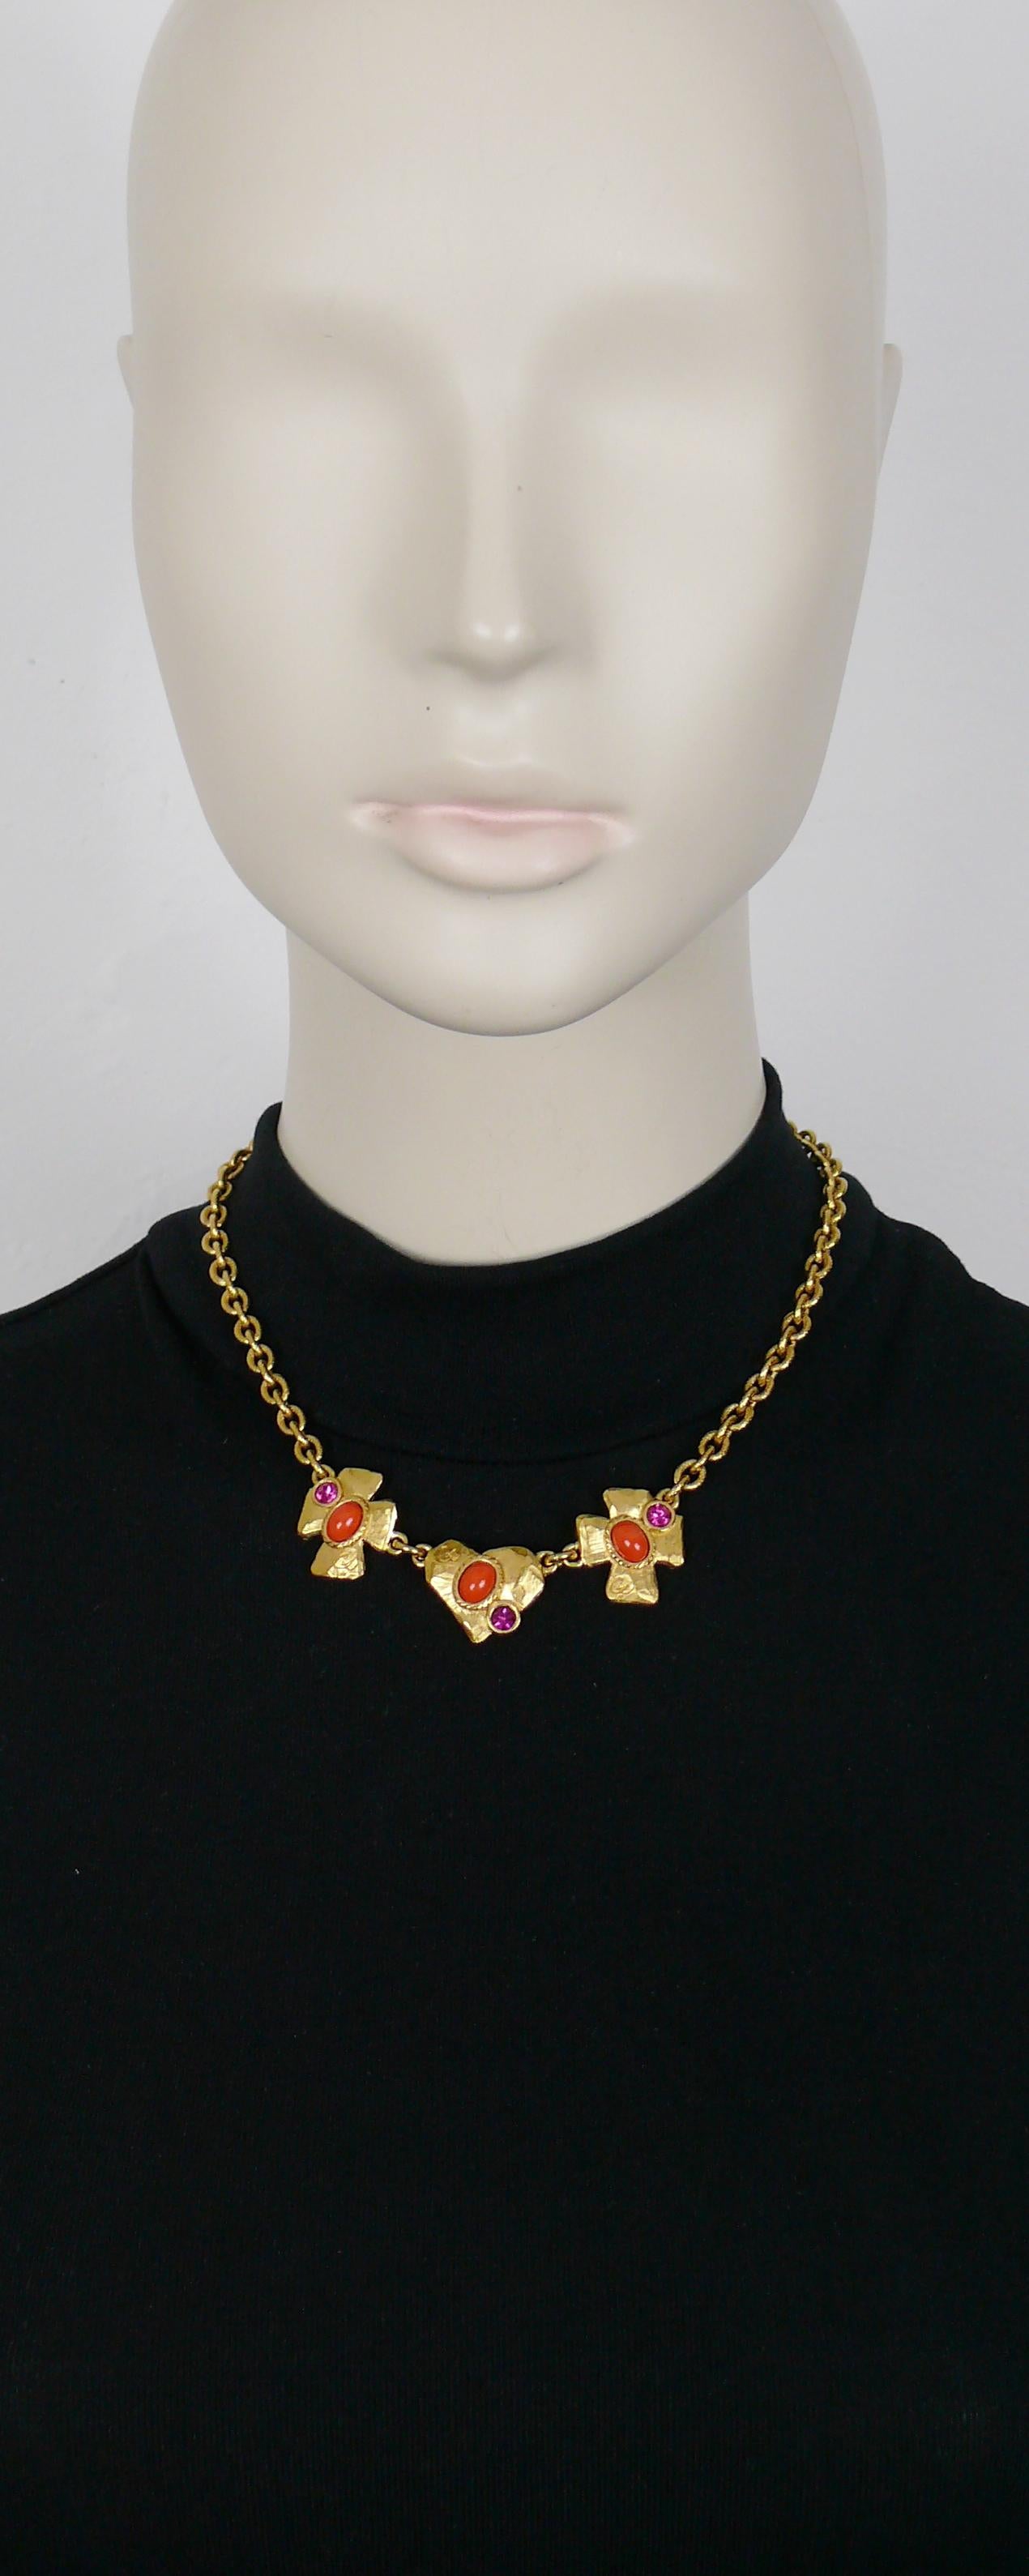 CHRISTIAN LACROIX vintage gold toned chain necklace featuring two crosses and a heart embellished with orange glass cabochons, fuchsia pink crystals and engraved with the CL monogram.

Marked CHRISTIAN LACROIX CL Made in France.

Indicative